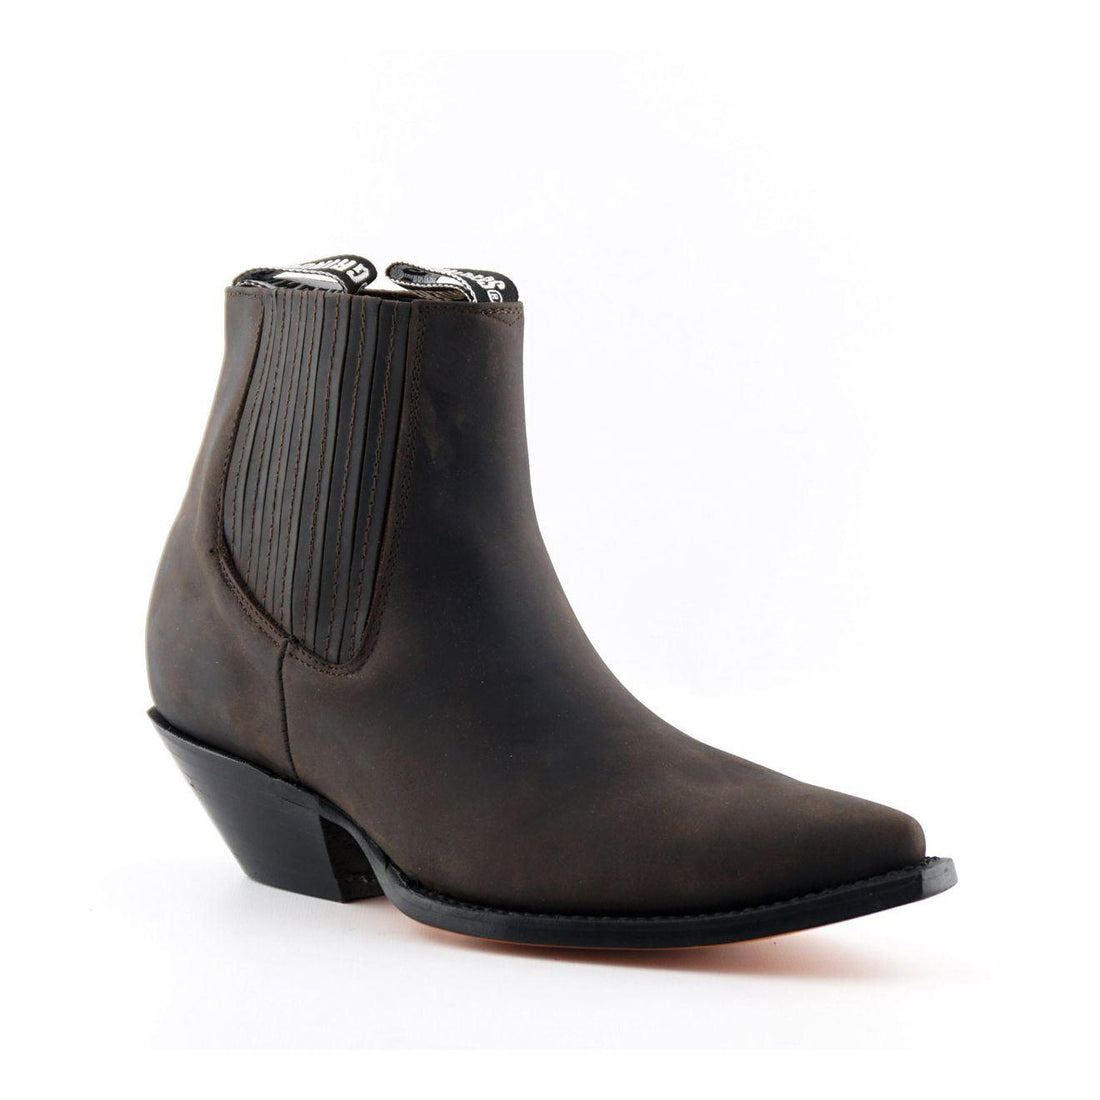 Grinders Unisex Brown Western Chelsea Boots- Mustang - Upperclass Fashions 